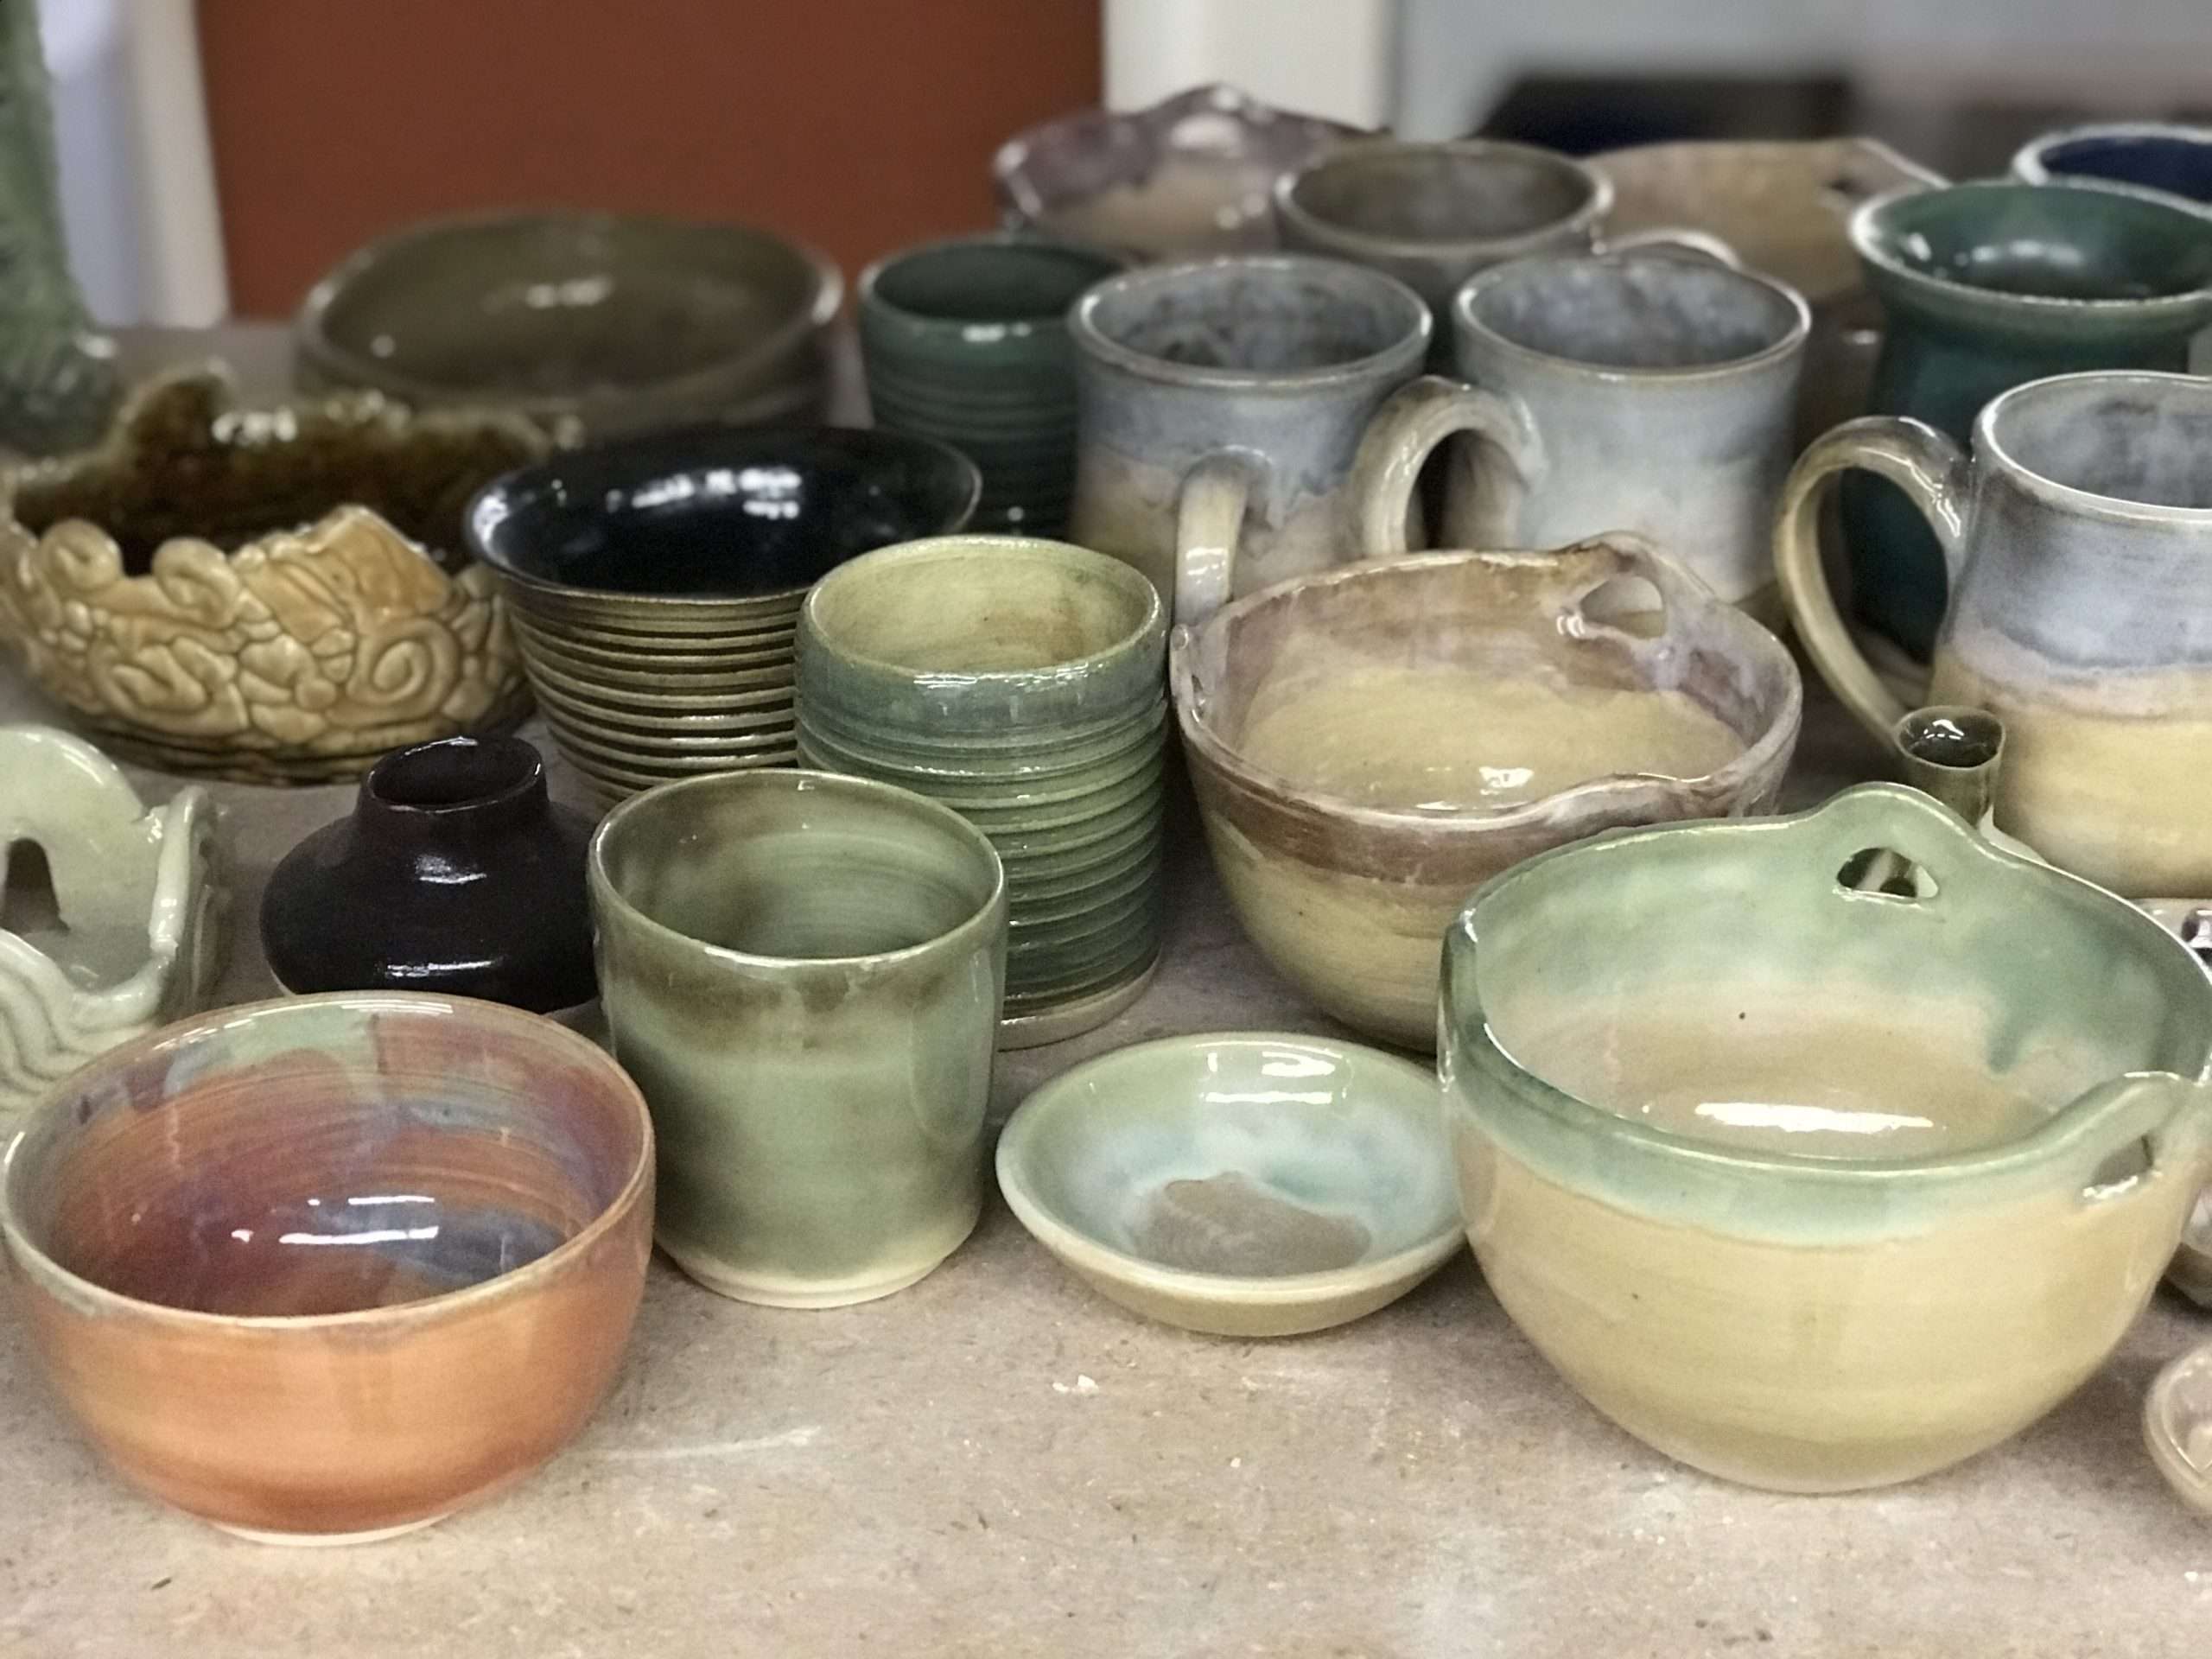 Learn to make ceramics pottery at The Curious Forge